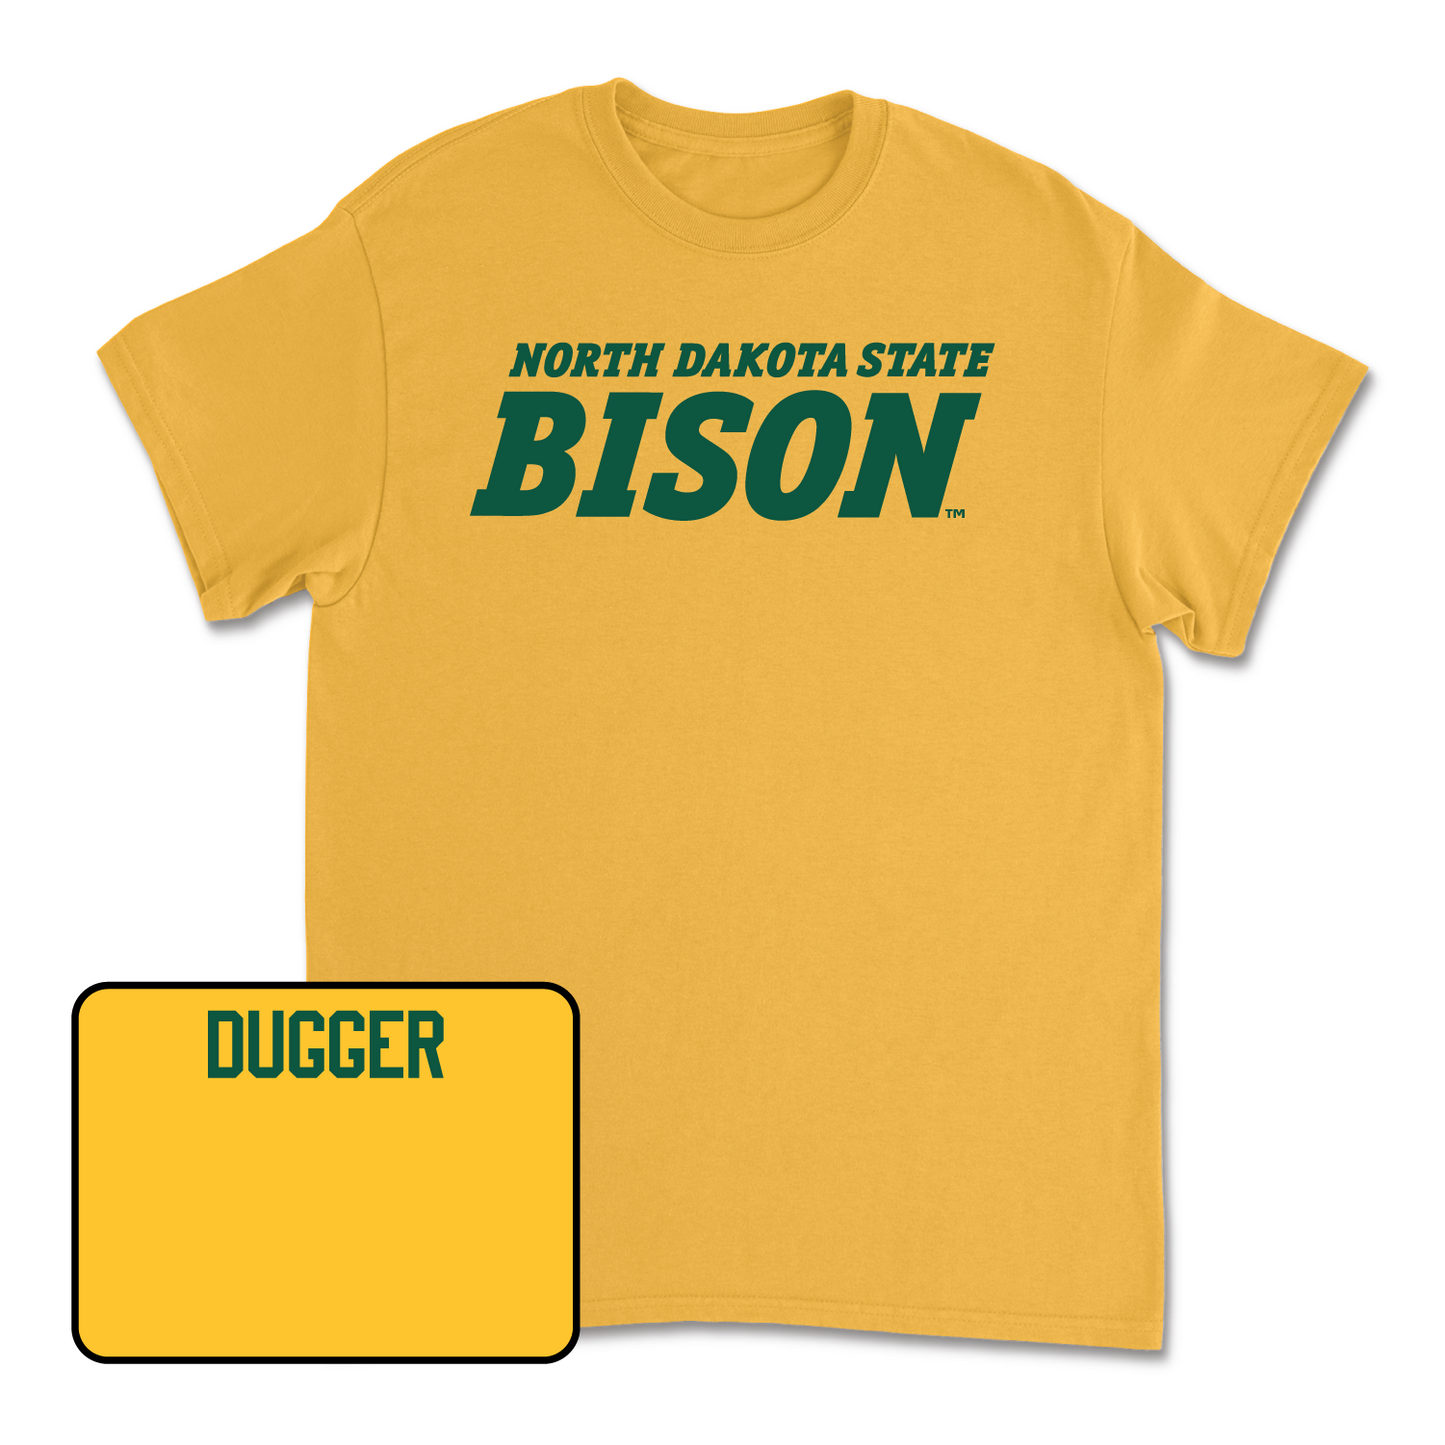 Gold Track & Field Bison Tee Youth Large / Adam Dugger